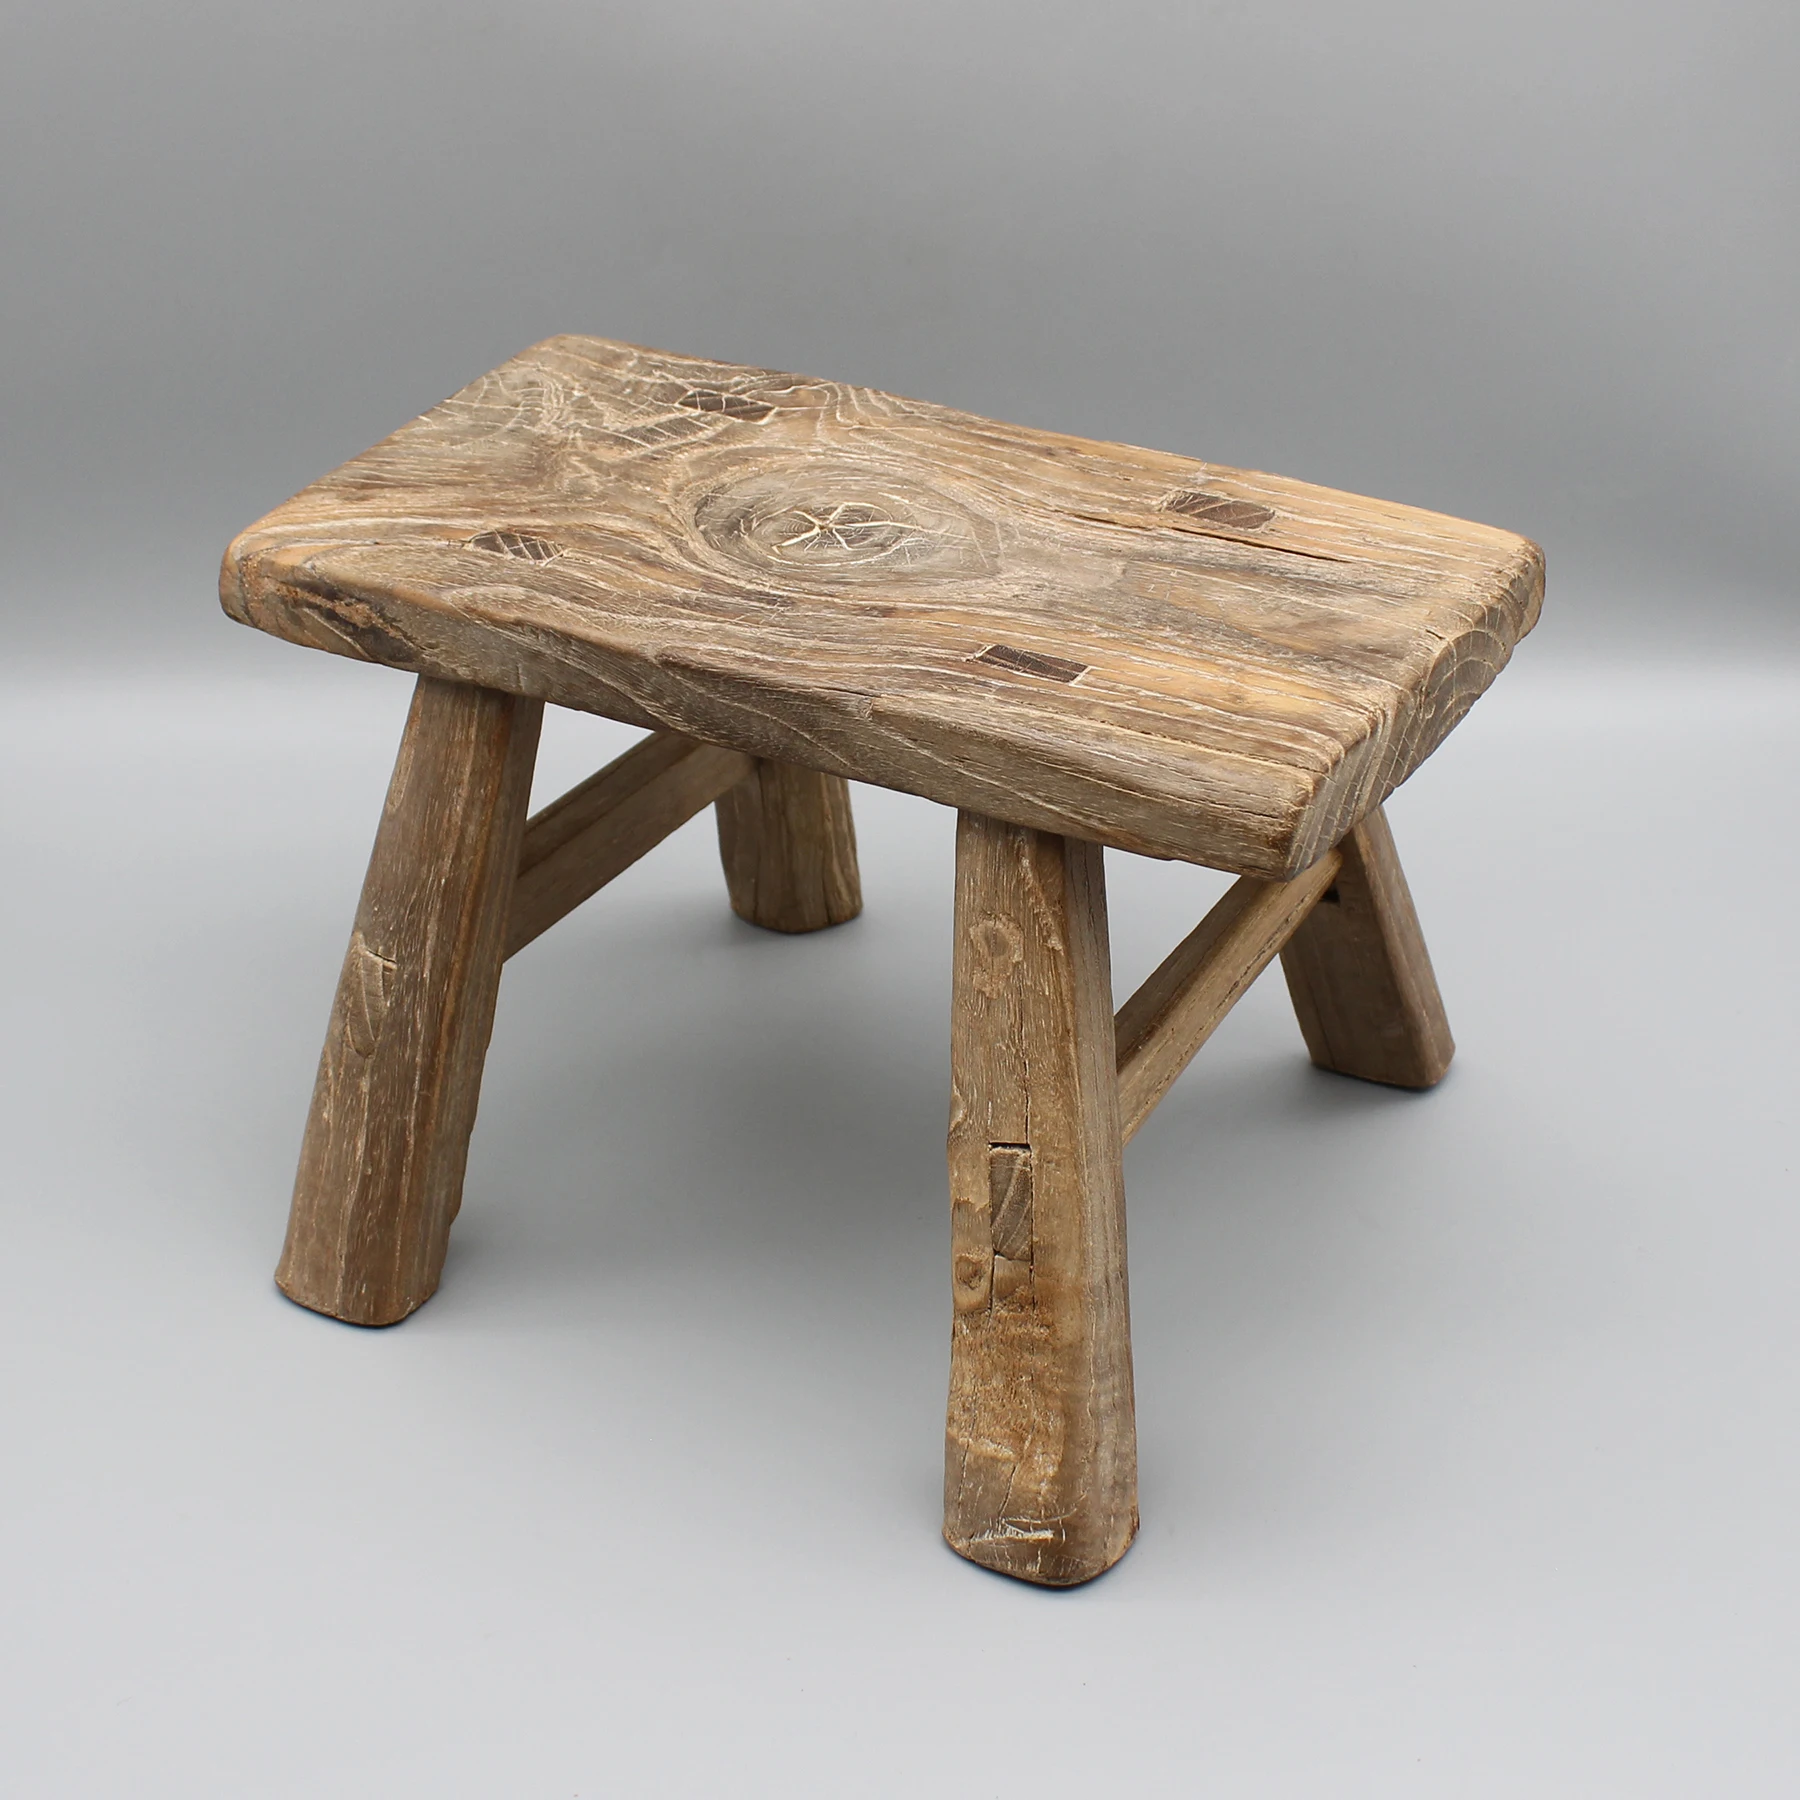 

Old wooden stool, Solid wood, Chinese antique, Mortise and tenon jointed stool